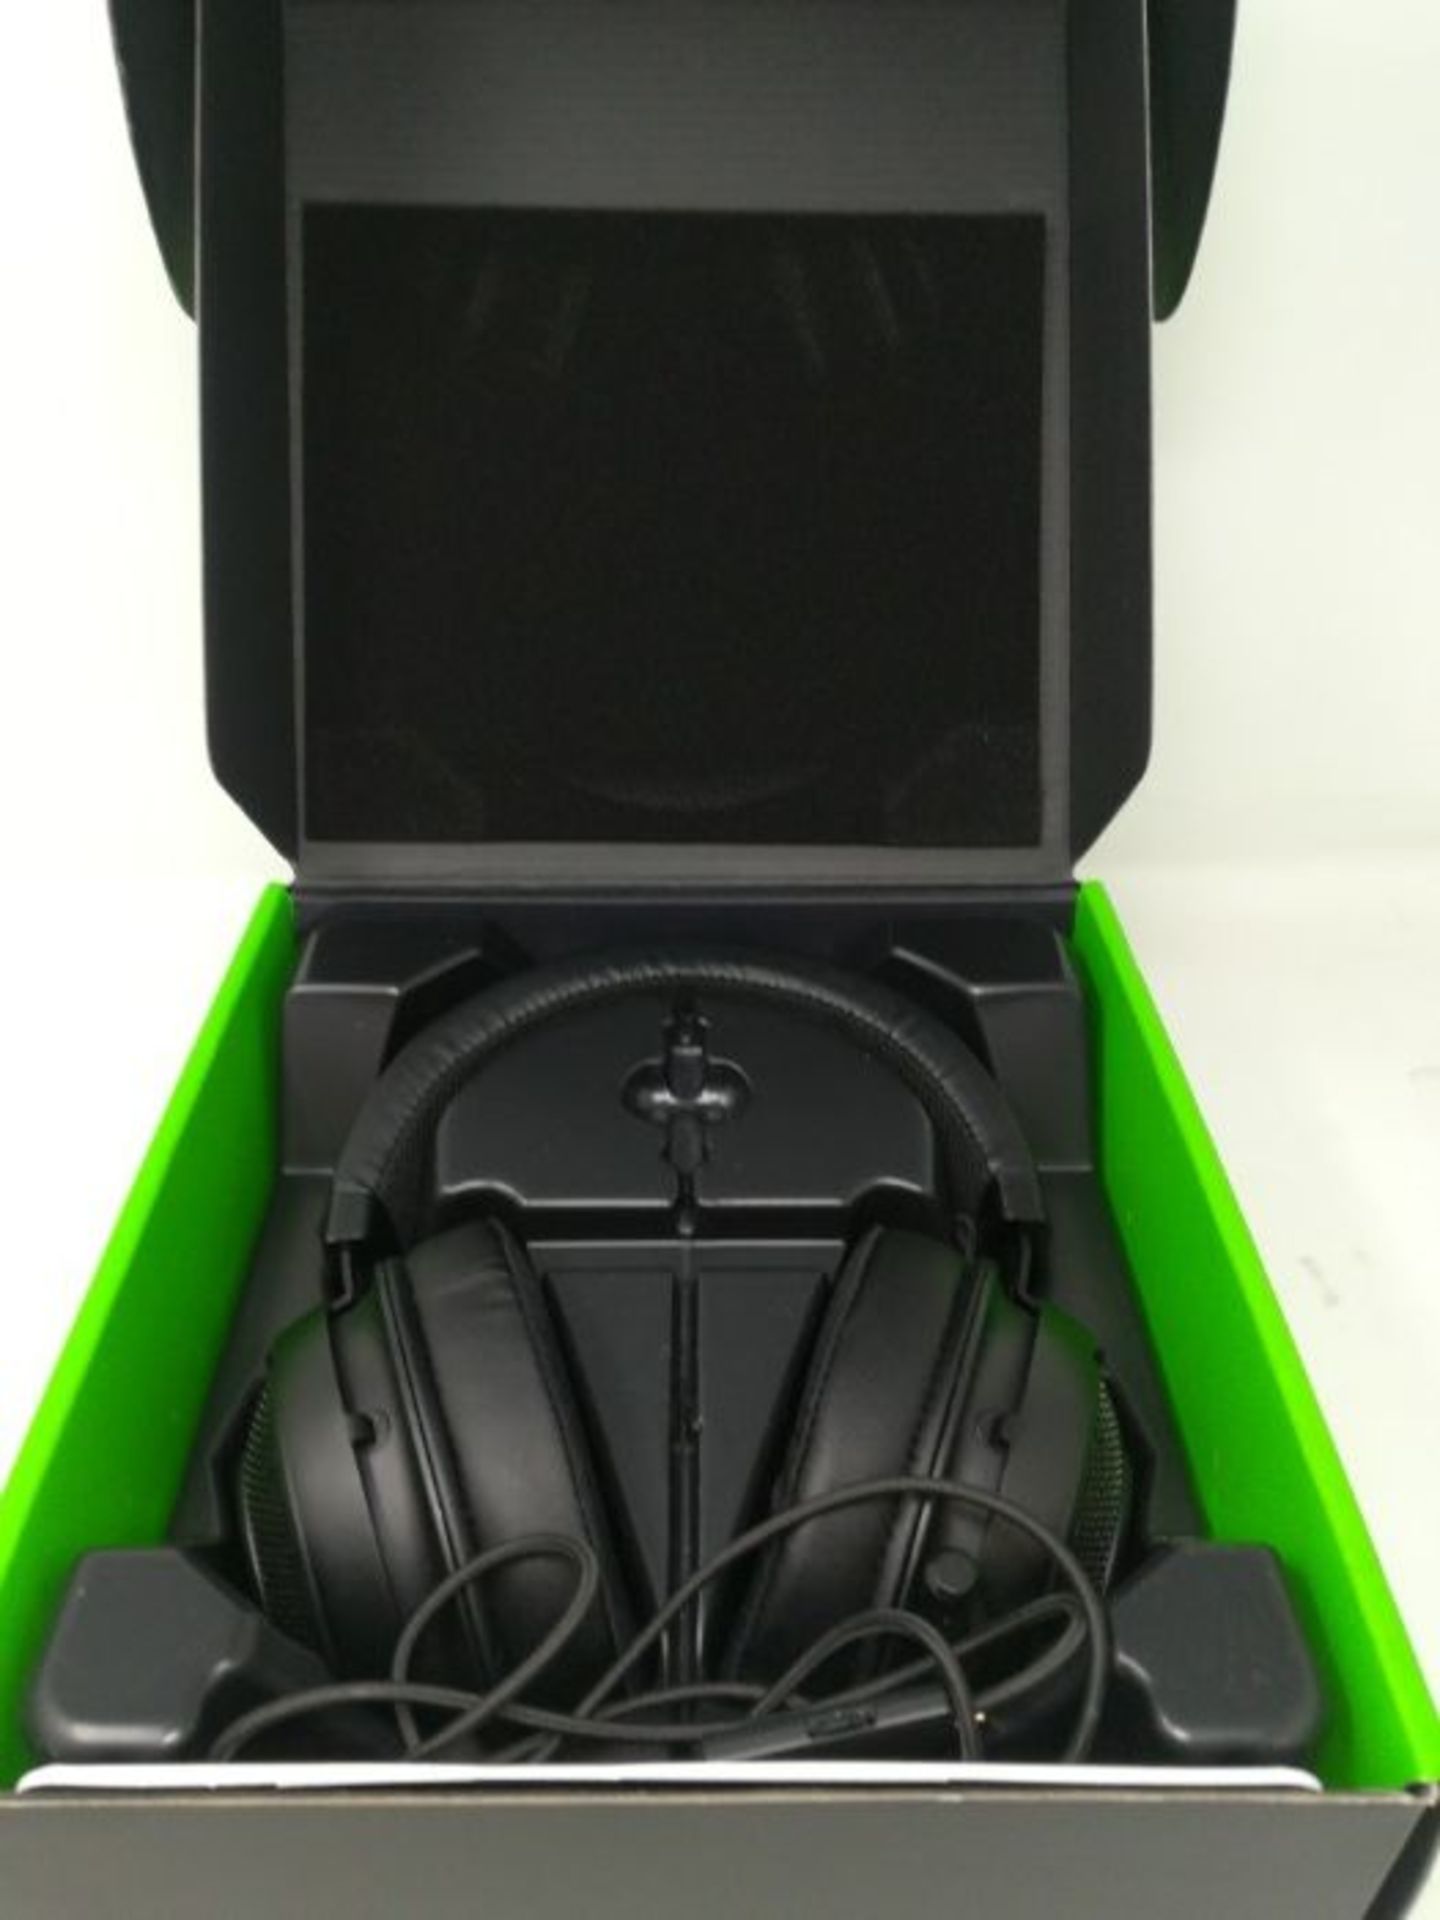 RRP £67.00 Razer Kraken - Wired Gaming Headset for Multiplatform Gaming for PC, PS4, Xbox One and - Image 2 of 2